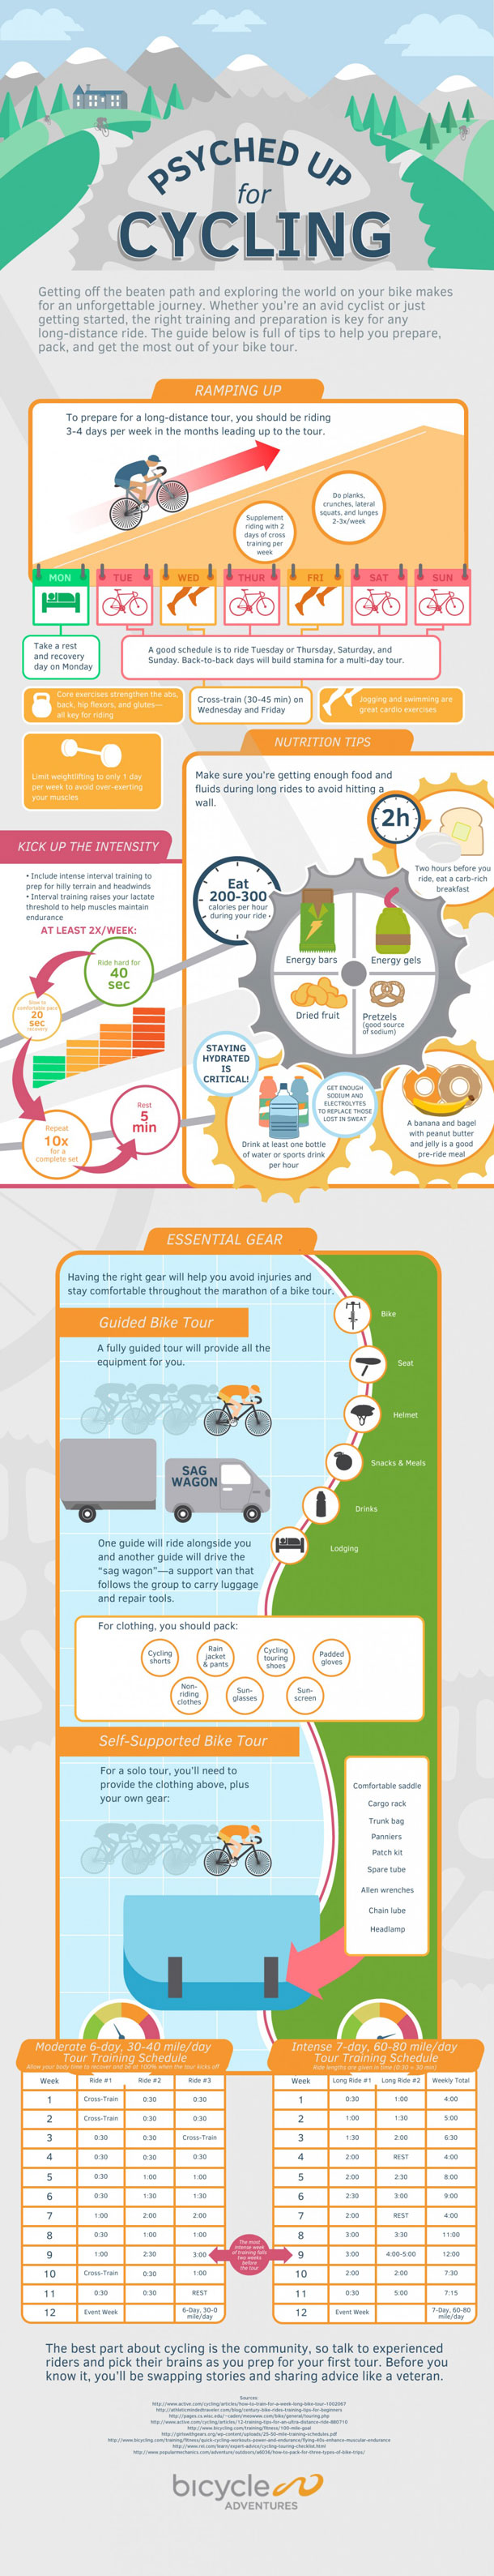 cycling-infographic